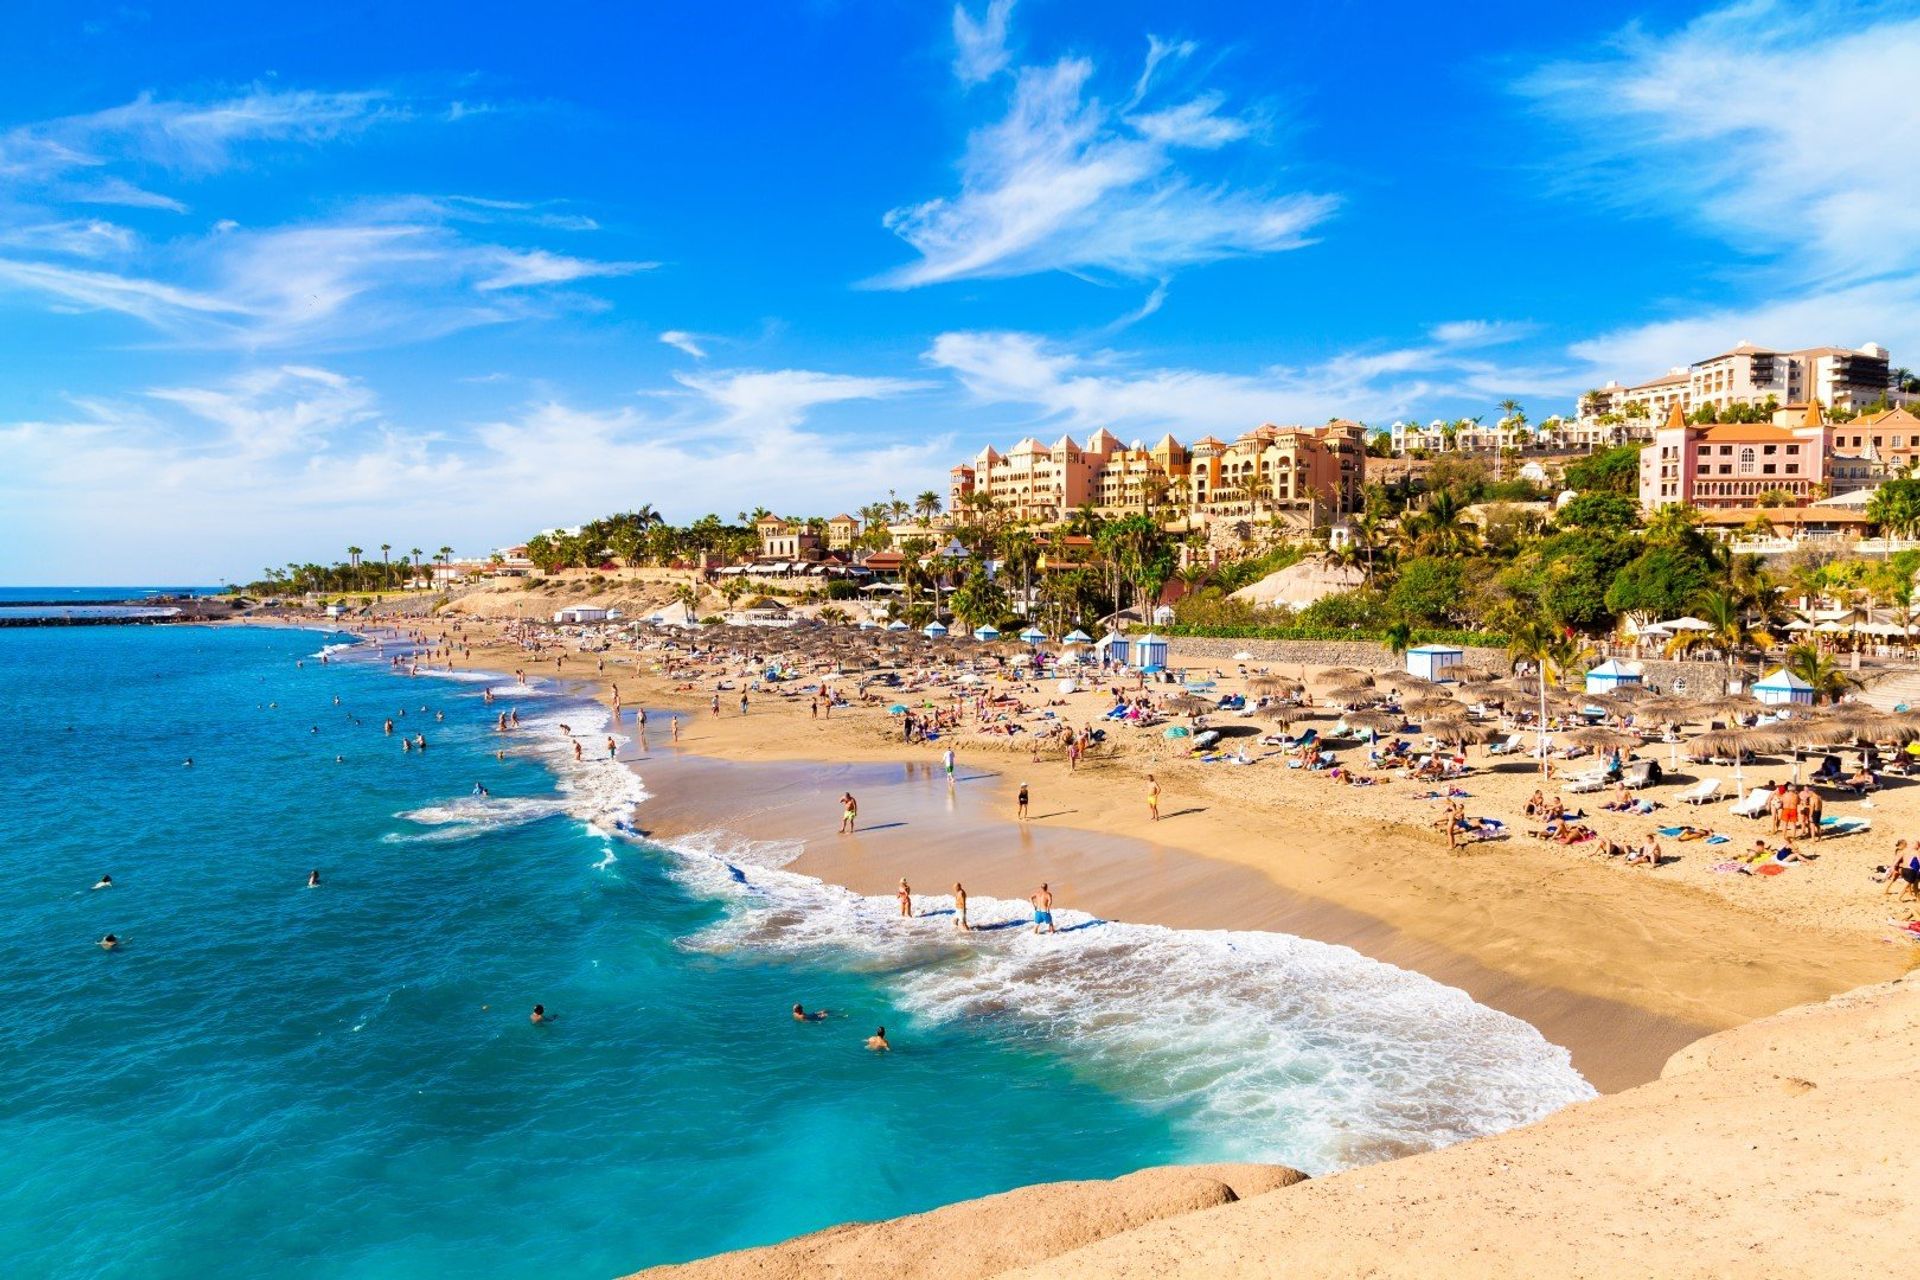 Enjoy the vast stretch of golden sand and turquoise waters on Costa Adeje in Tenerife